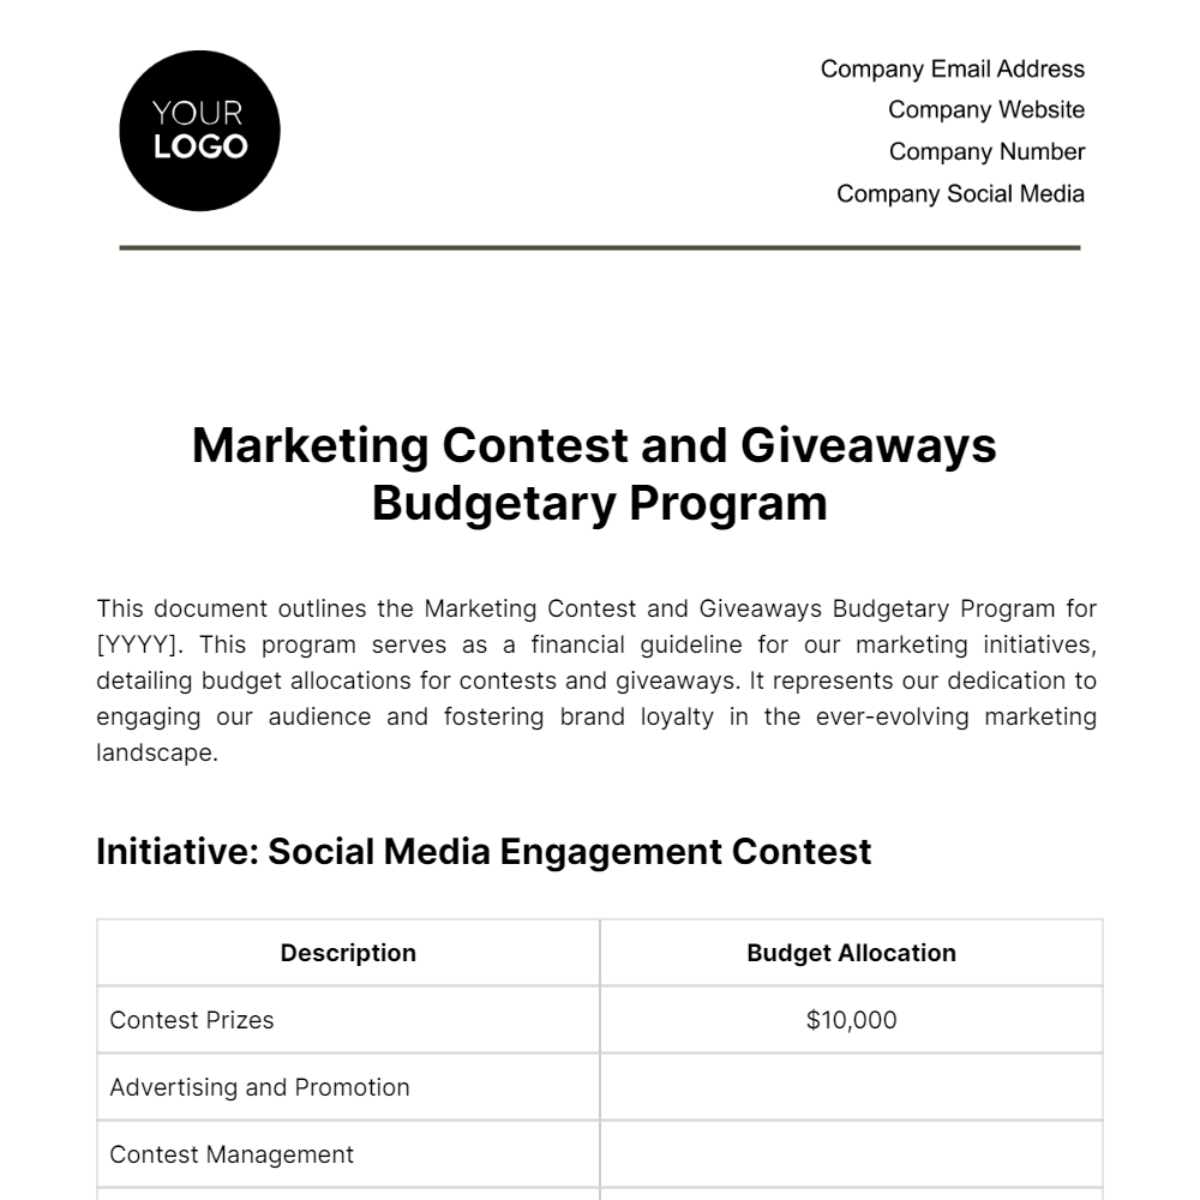 Marketing Contest and Giveaways Budgetary Program Template